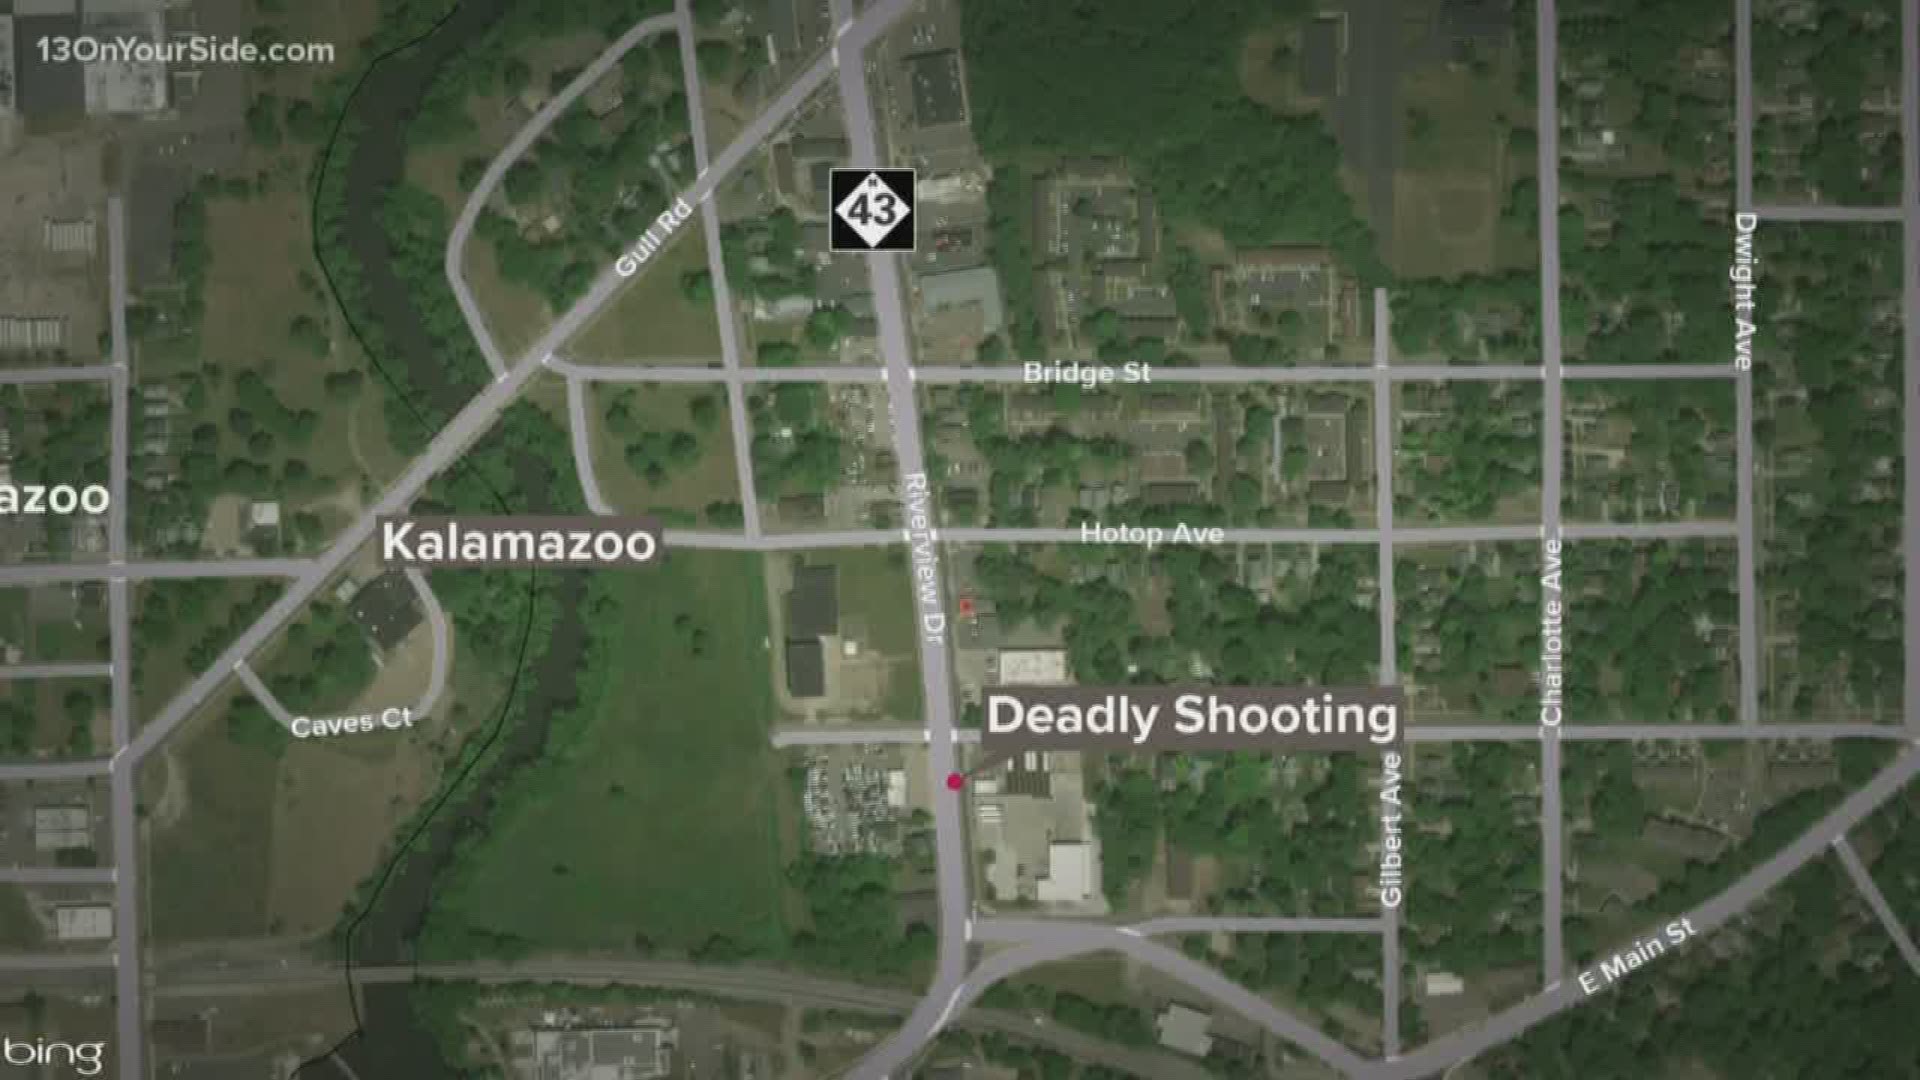 Authorities in Kalamazoo are investigating a shooting that left one person.